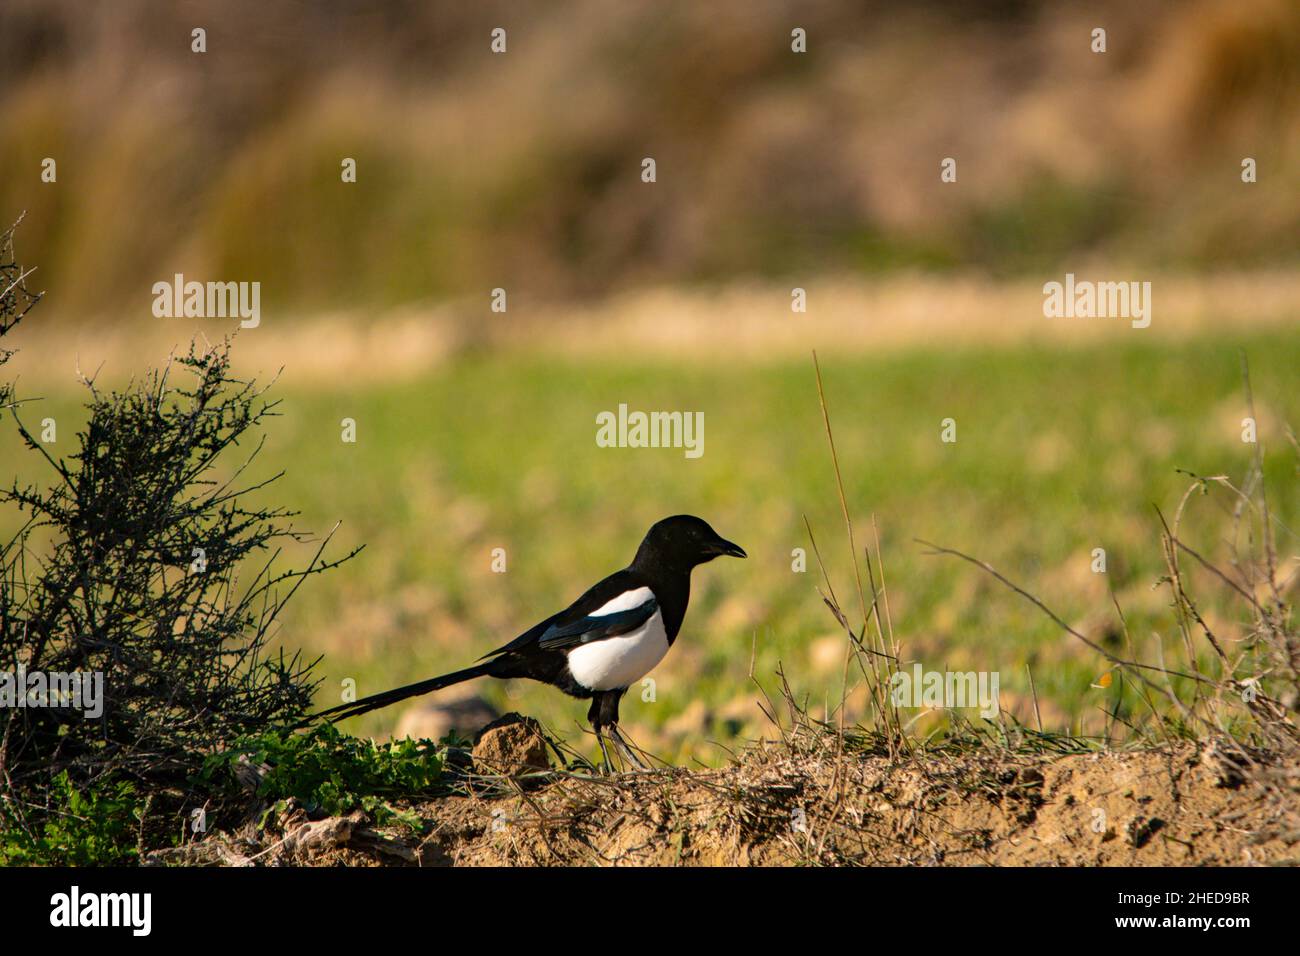 The common magpie is a species of passerine bird in the Corvidae family. Stock Photo